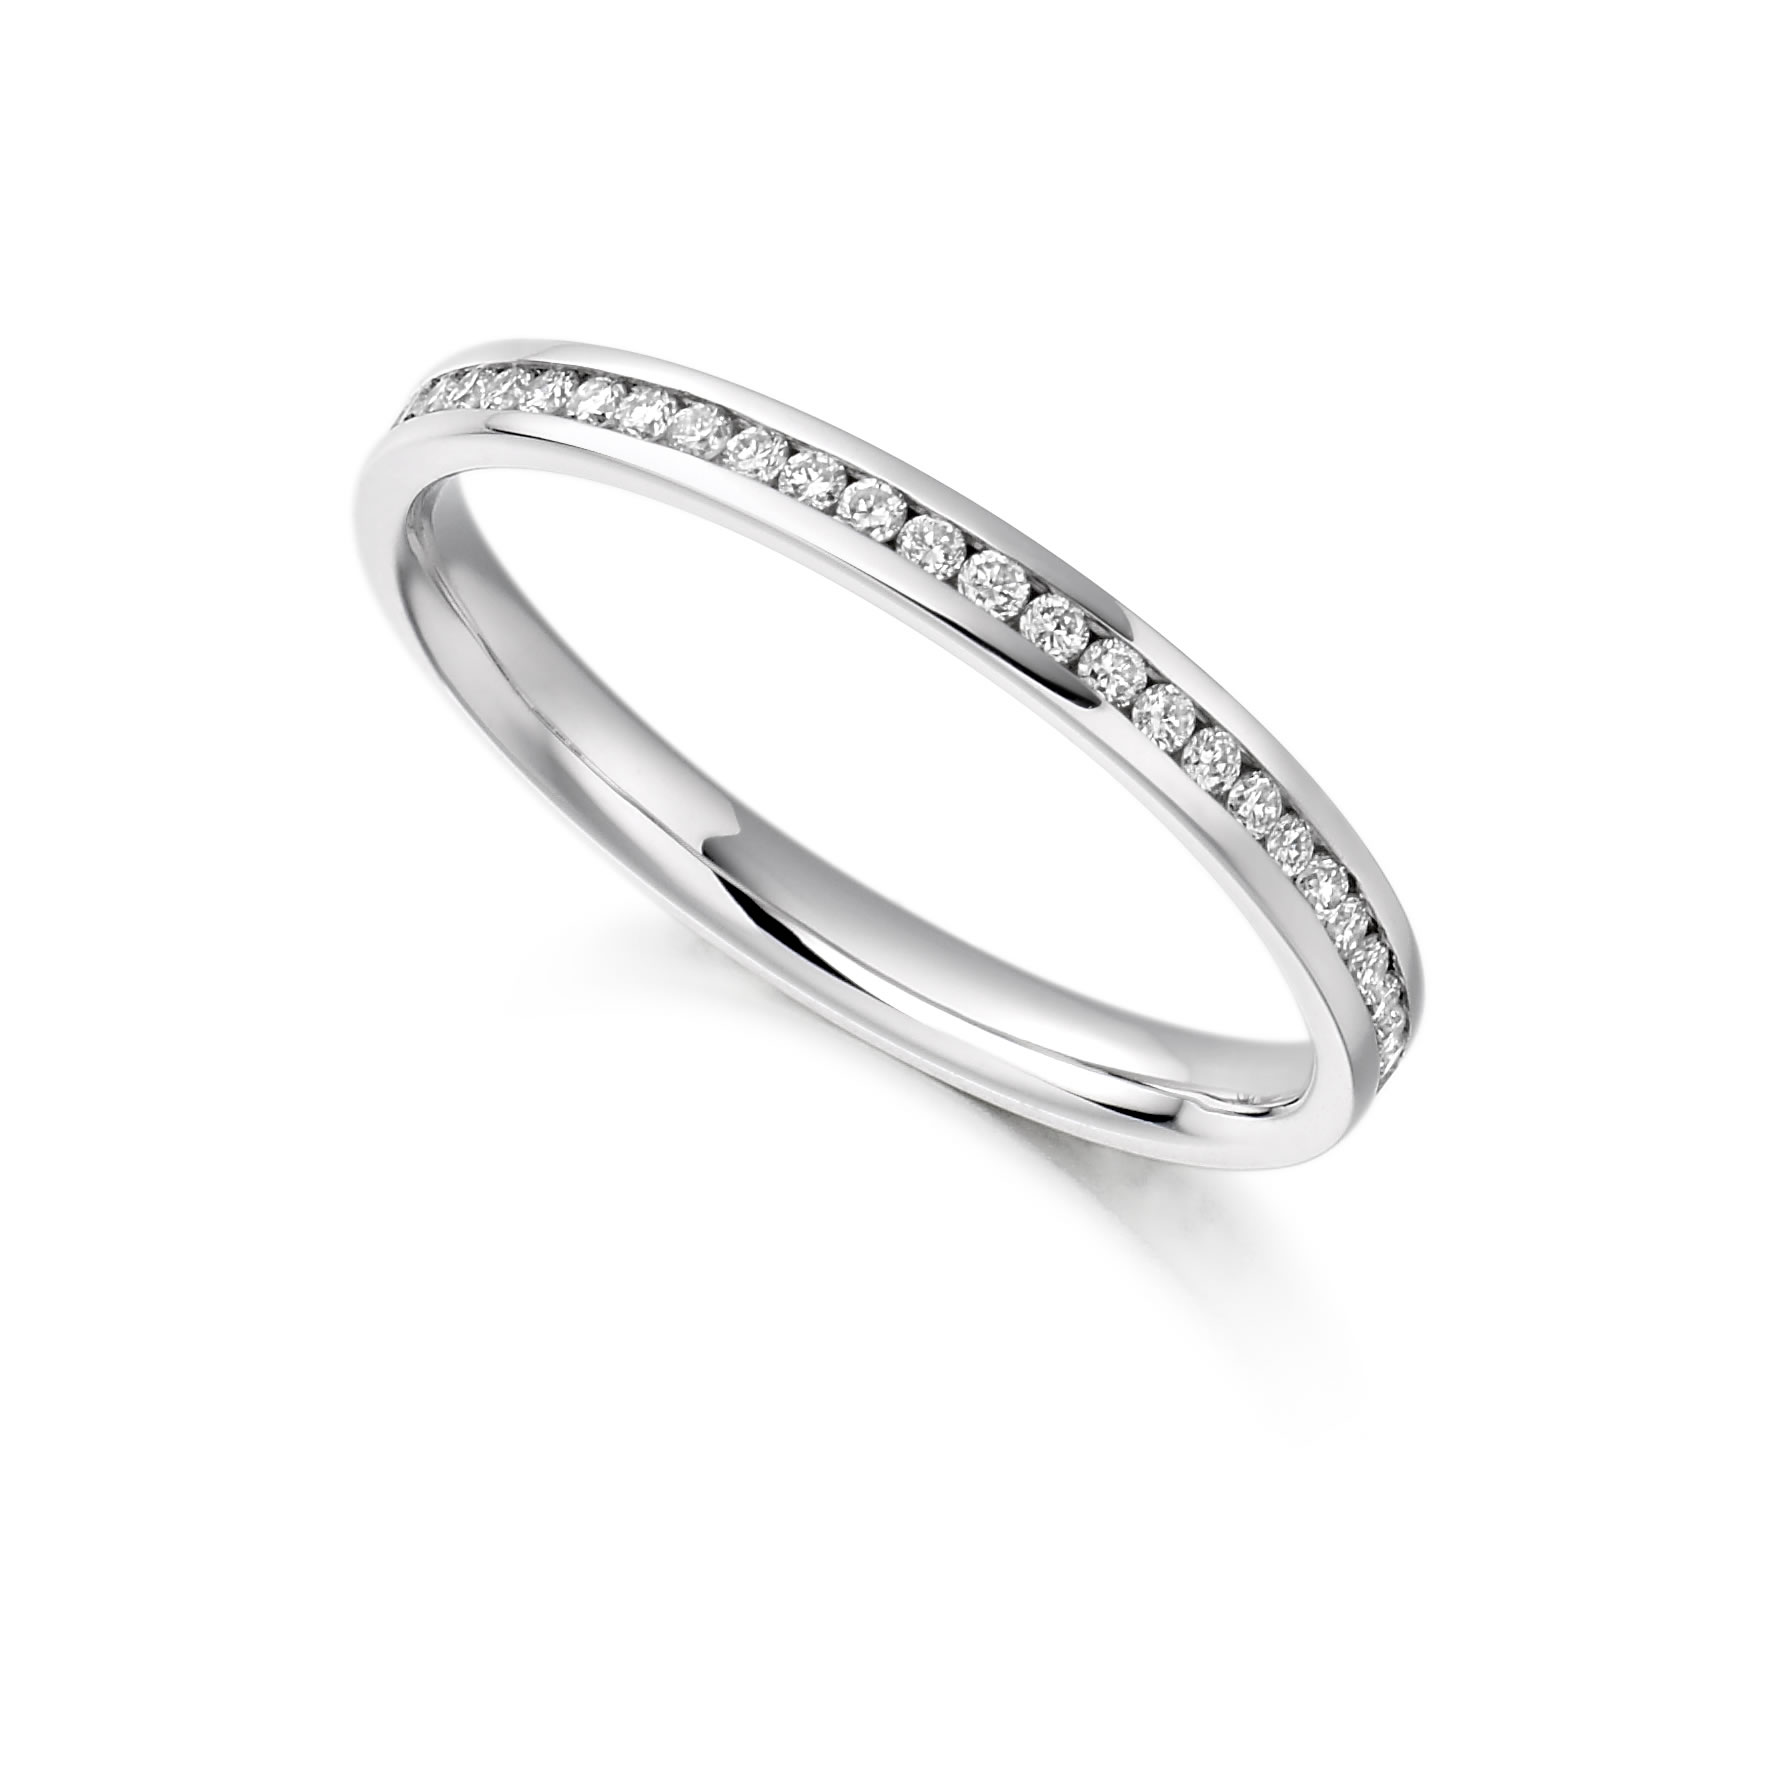 Raphael Channel Set Eternity Ring with Round Brilliant Stones, available in various metals & with differing grades of stone colour and clarity